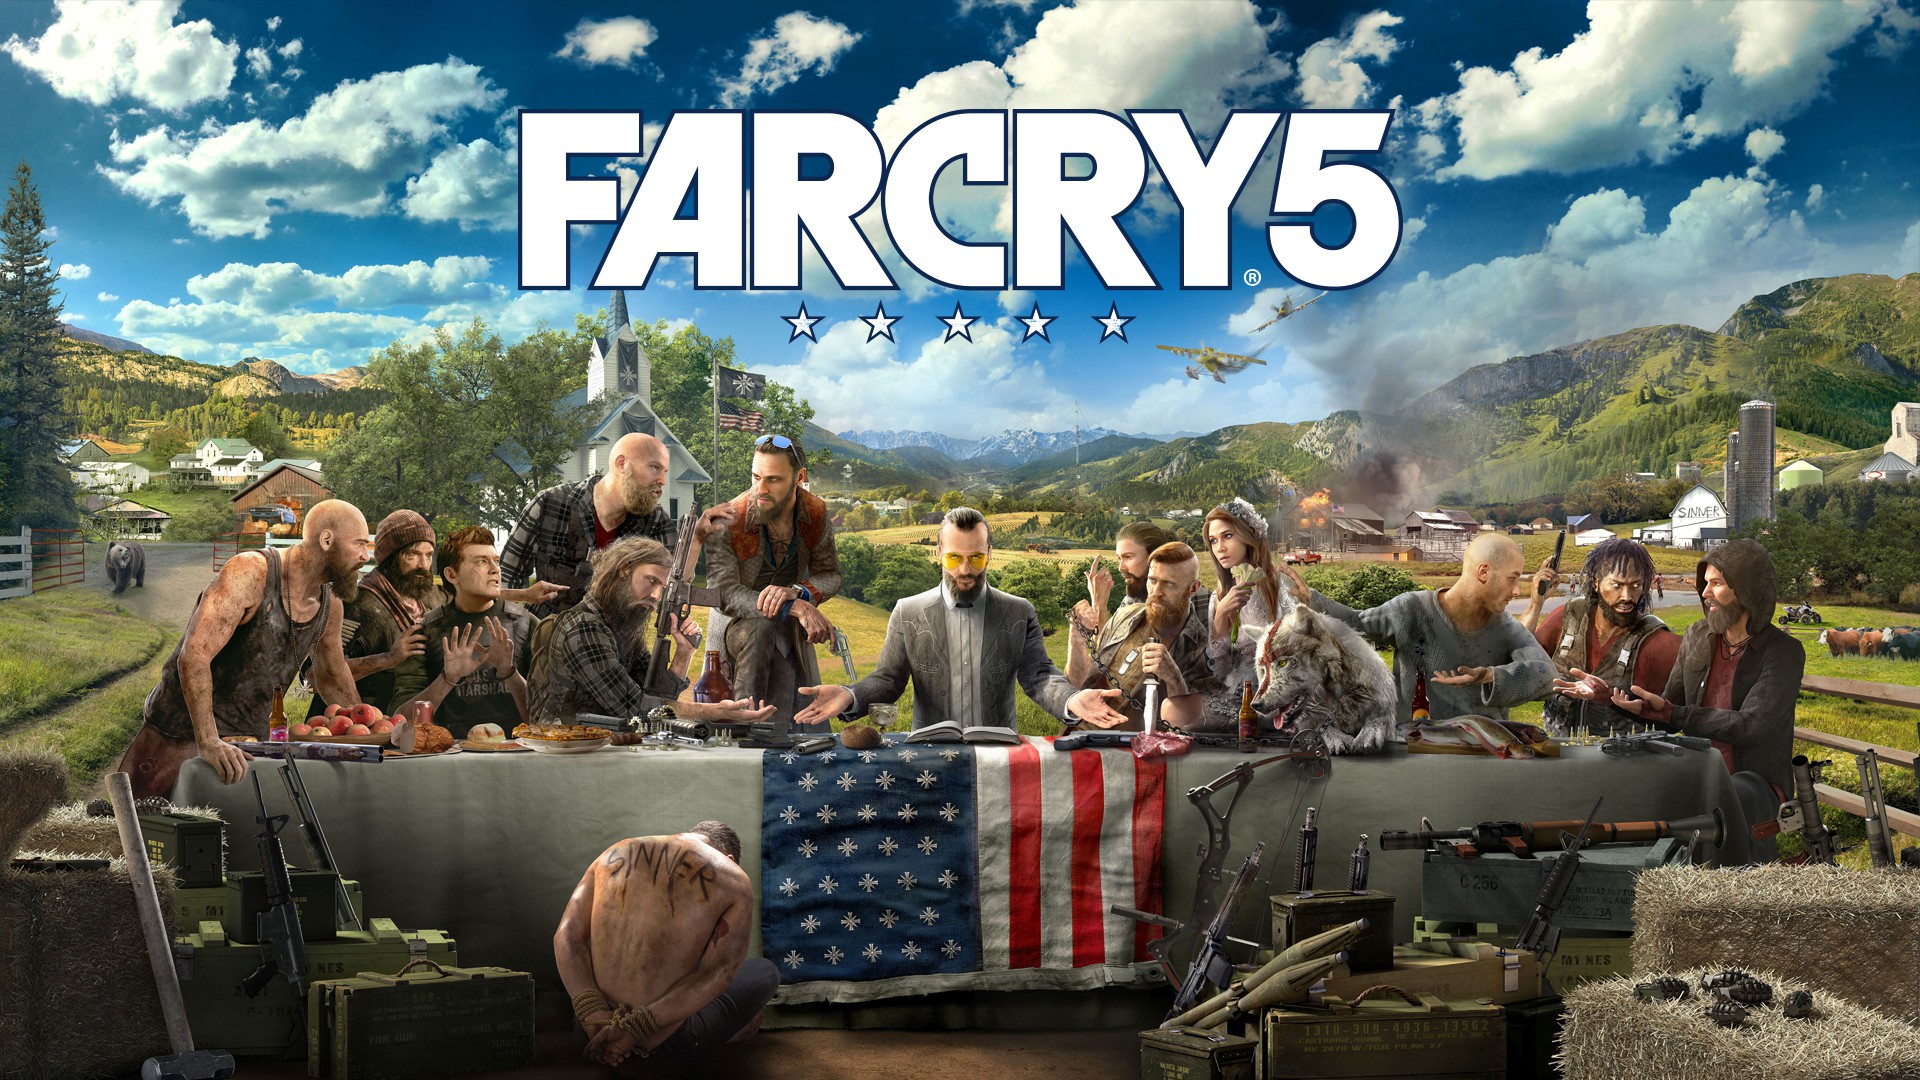 download far cry 6 game of the year for free